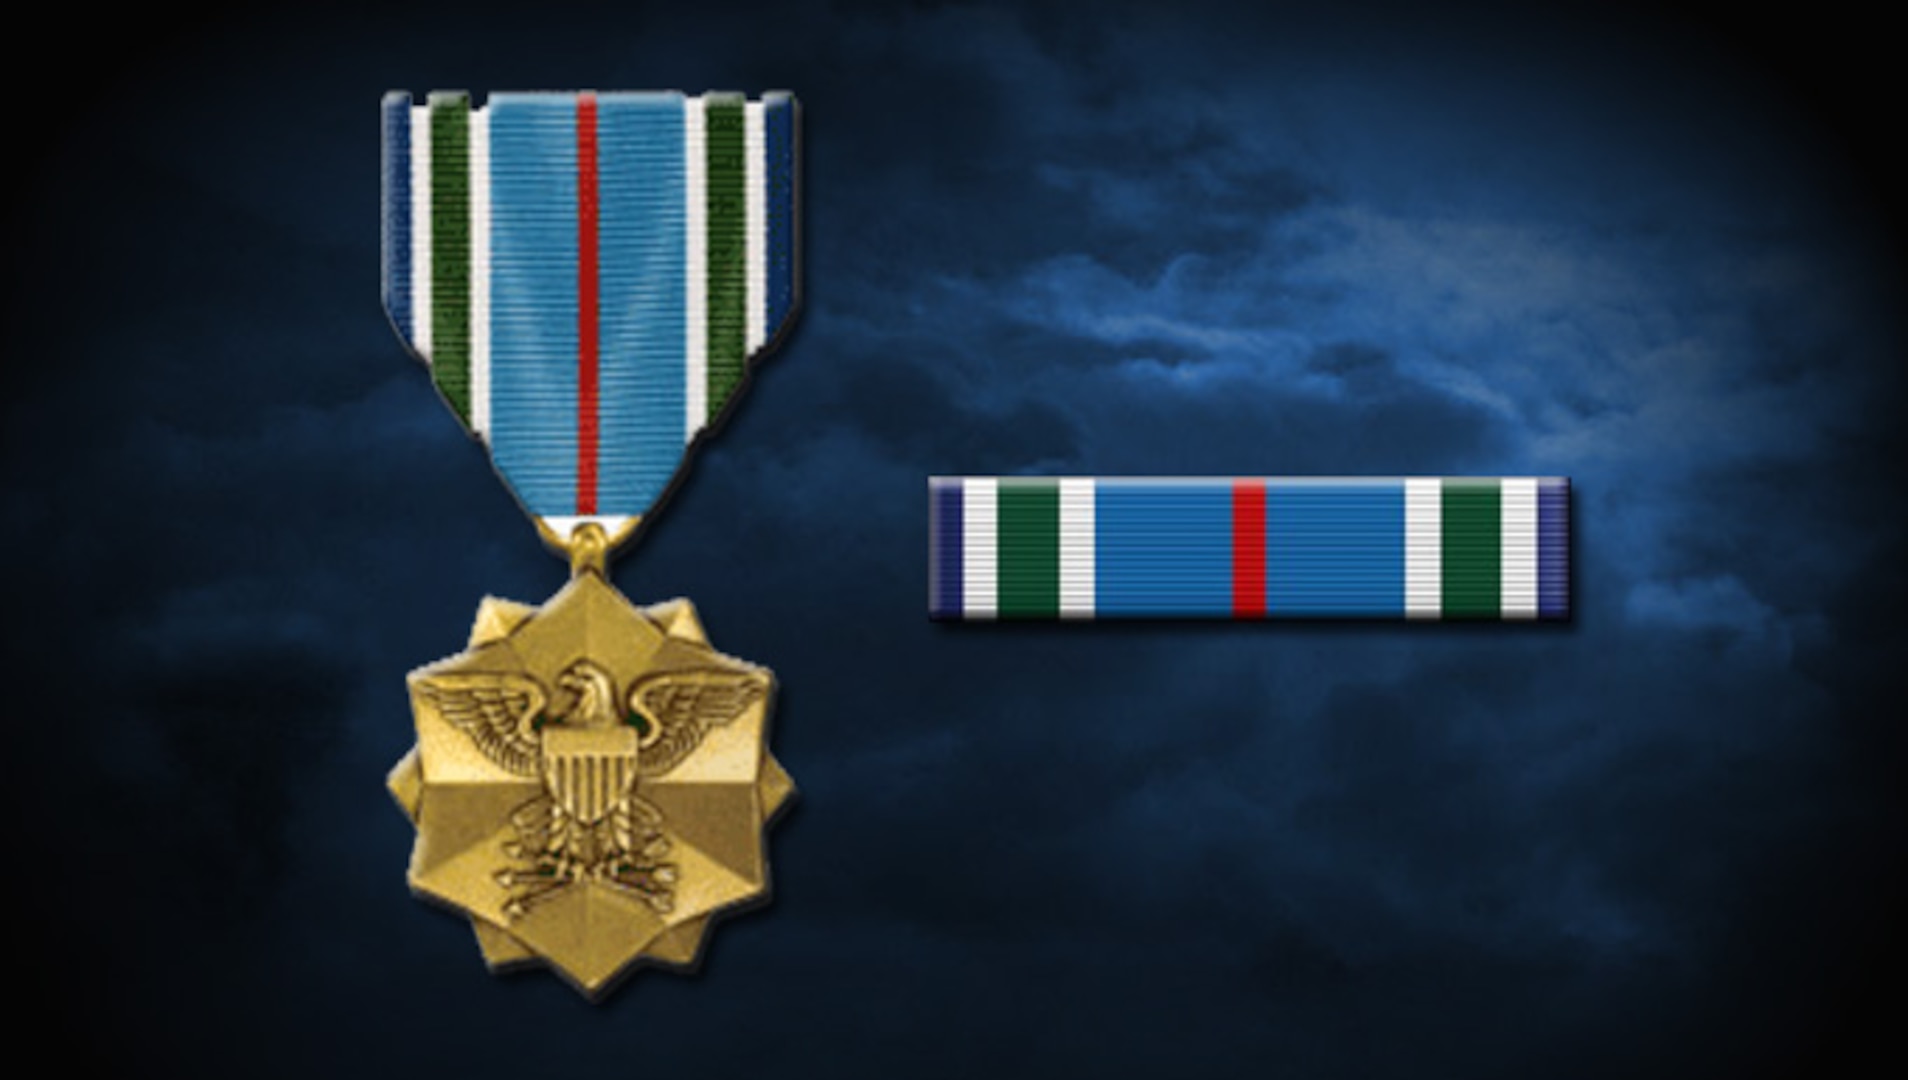 Joint Service Achievement Medal awarded to Montagu-Hunter Challenge volunteer Airmen >Joint Base San Antonio >News” style=’clear:both; float:left; padding:10px 10px 10px 0px;border:0px; max-width: 335px;’> Earlier than you open your gold IRA, it’s vital to grasp how these accounts work and what exactly they entail. Learn the way to purchase gold in an IRA if you wish to own physical gold somewhat than paper belongings – i.e., stocks, mutual funds or ETFs – of gold corporations. Get Your FREE COPY Right now! There is no definitive answer to this query because it is dependent upon a number of factors, together with the worth of gold at the time of funding, the charges related to setting up and maintaining a gold IRA, and the investor’s personal financial state of affairs. This can simulate dialogue, reply comply with-up questions, admit mistakes, problem incorrect premises and reject inappropriate requests. None of us felt able to rise to the problem. Gold and different valuable metals are thought of a hedge against inflation and will rise in worth during durations of inventory market volatility.</p>
<p> He started as he meant to go on, creating a sample: mendacity in mattress till lunchtime, he’d rise and scour the fridge, cupboards and bread bin for provisions. I’d wake up in South Armagh and he’d be in a position to speak to me the best way he wished, hung the wrong way up in a cattle shed. When he brought his feast into the sitting room and plopped down on the sofa in entrance of the Television, I gingerly tried to clarify the fairly primitive home rules. Gold, silver, platinum and palladium cannot be stored simply anyplace. This may increasingly include types for opening a new account, transferring assets into the account, and selecting a custodian. Nevertheless, these should meet purity necessities and are available authorized kinds like coins or bullion. Other options for buying gold in an IRA embrace utilizing the self-directed possibility and having your custodian buy the coins and bars in your behalf. Fashionable coins include the American Gold Eagle, Canadian Gold Maple Leaf, and the South African Krugerrand.</p>
]]></content:encoded>
					
					<wfw:commentRss>https://grandmerebuffet.com.br/ideas-to-search-out-an-admirable-aquatic-facility-design-advisor/feed/</wfw:commentRss>
			<slash:comments>0</slash:comments>
		
		
			</item>
		<item>
		<title>The Girls Of Iran’s Underground Metal Scene</title>
		<link>https://grandmerebuffet.com.br/the-girls-of-irans-underground-metal-scene/</link>
					<comments>https://grandmerebuffet.com.br/the-girls-of-irans-underground-metal-scene/#respond</comments>
		
		<dc:creator><![CDATA[quentinbarnhill]]></dc:creator>
		<pubDate>Wed, 17 Jan 2024 22:38:16 +0000</pubDate>
				<category><![CDATA[taxes]]></category>
		<category><![CDATA[research gold iras]]></category>
		<guid isPermaLink=